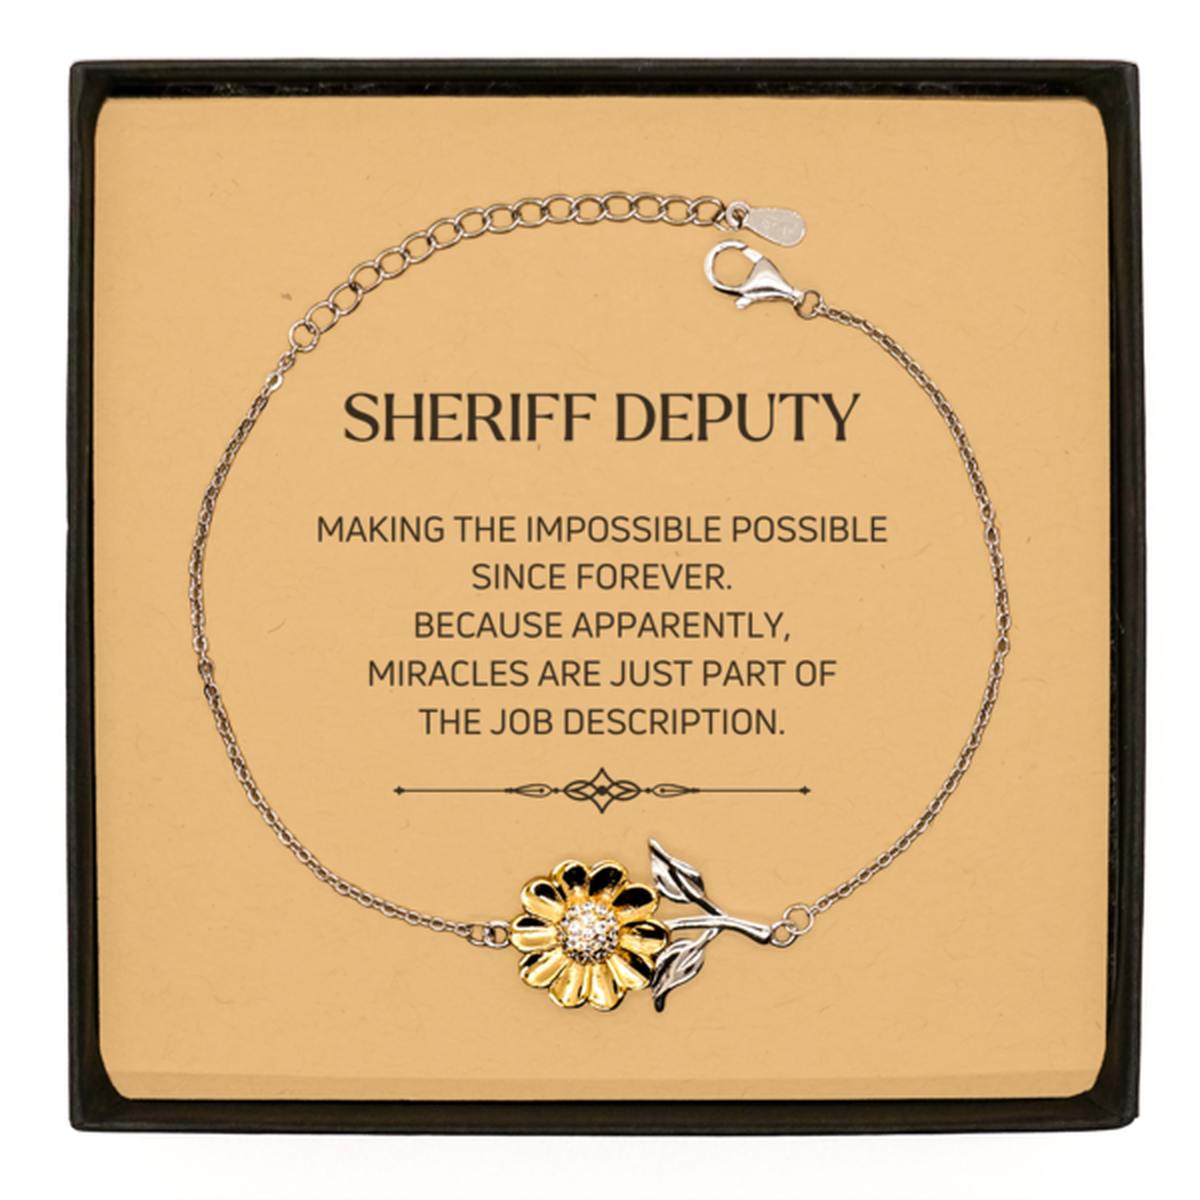 Funny Sheriff Deputy Gifts, Miracles are just part of the job description, Inspirational Birthday Sunflower Bracelet For Sheriff Deputy, Men, Women, Coworkers, Friends, Boss